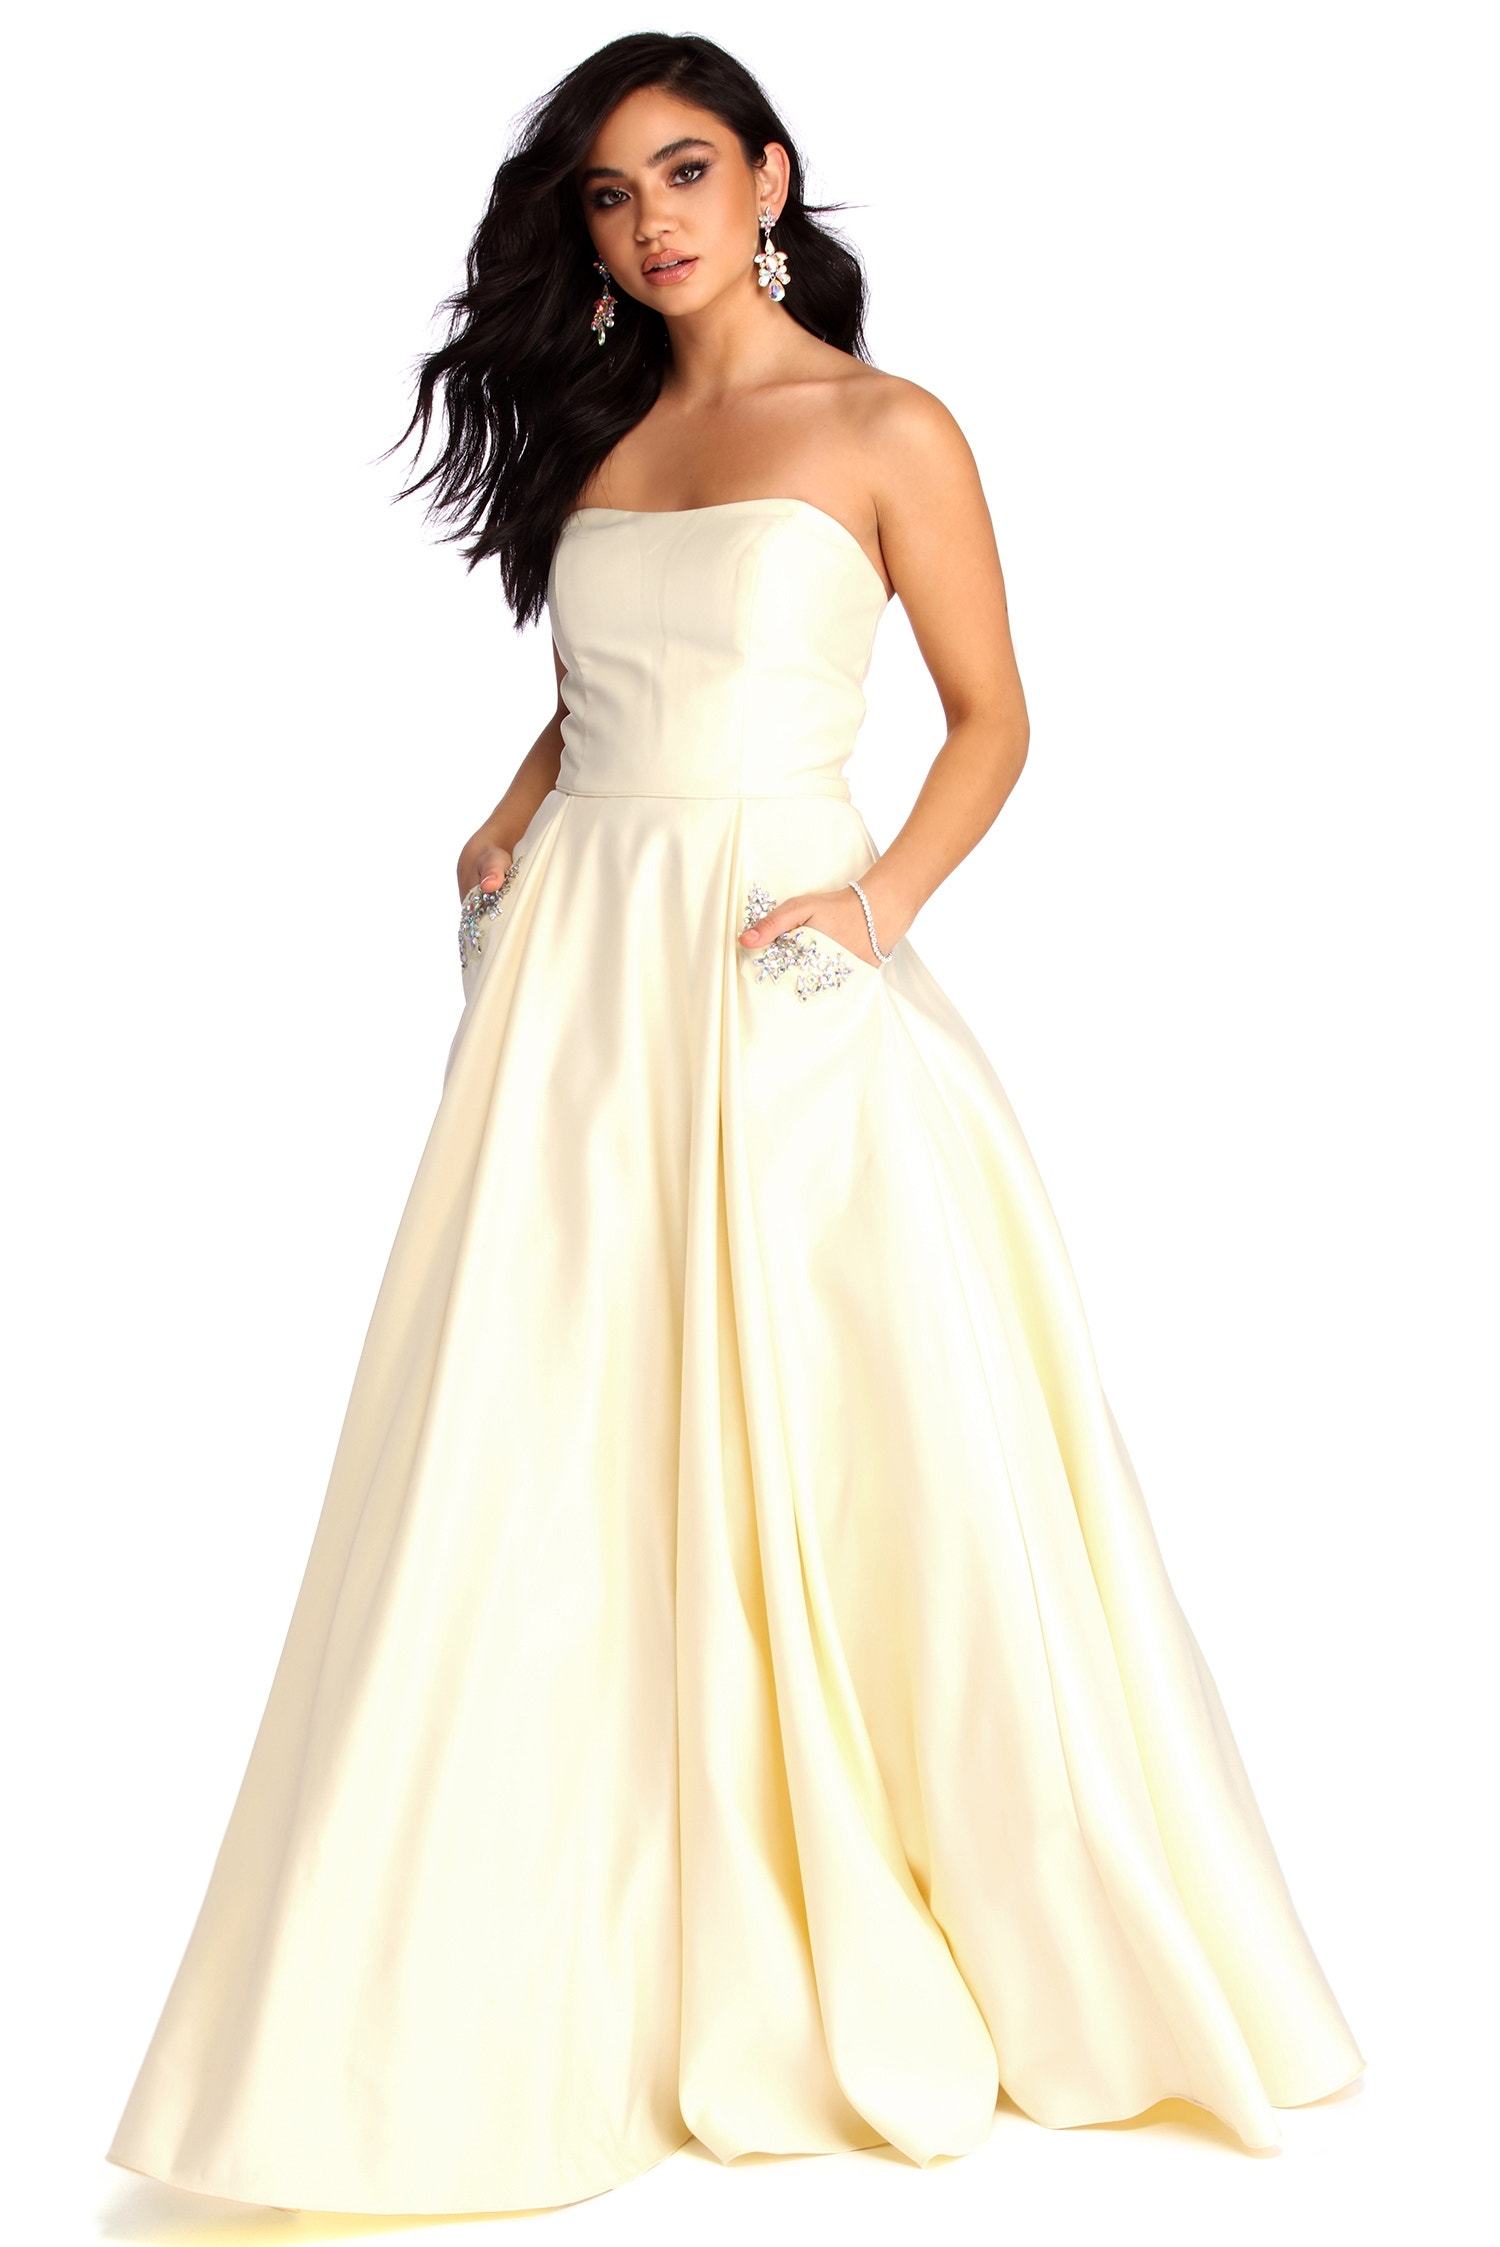 Josephine Formal Jewel Ball Gown - Lady Occasions